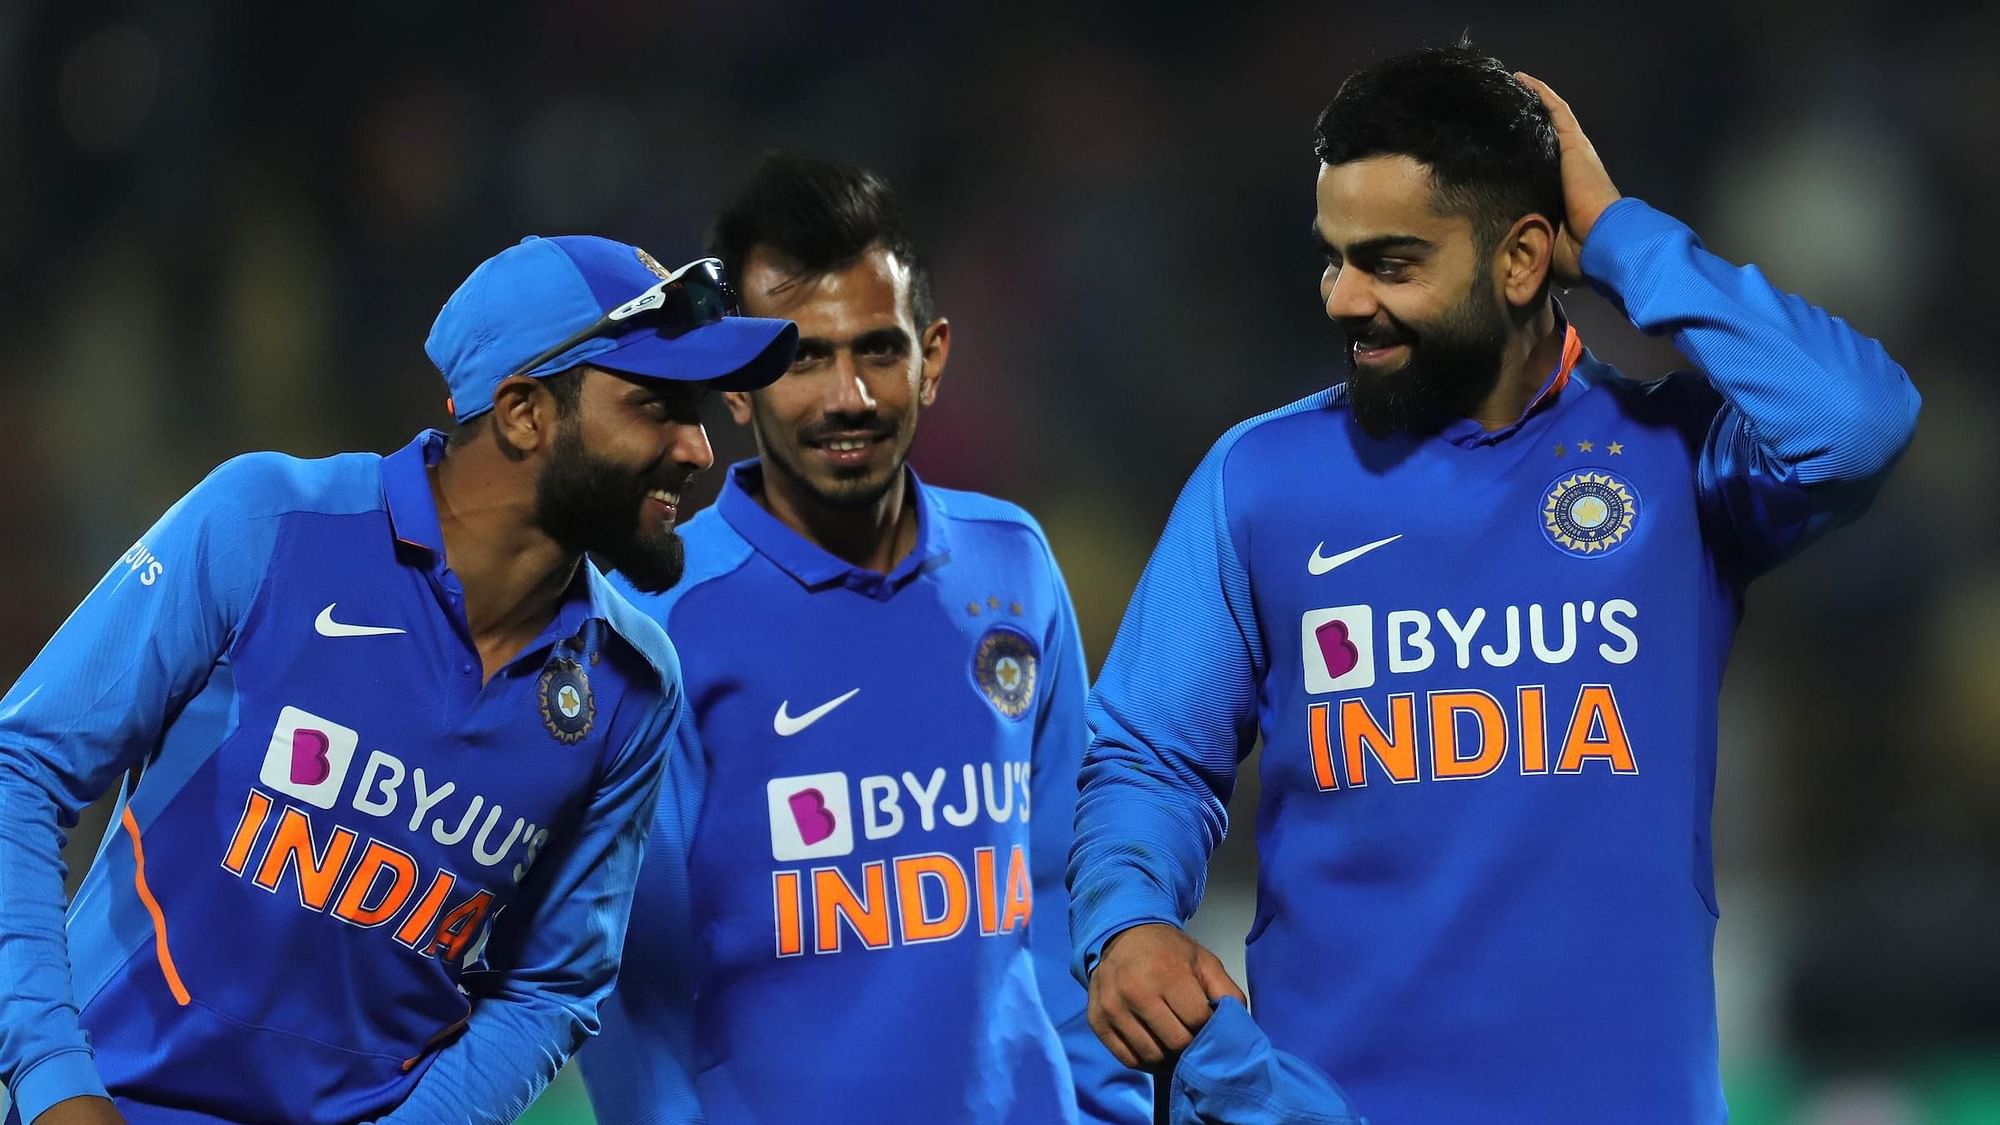 Here’s a look at all the records that were broken as India beat Australia by 36 runs to level the three-match series 1-1 in Rajkot on Friday.